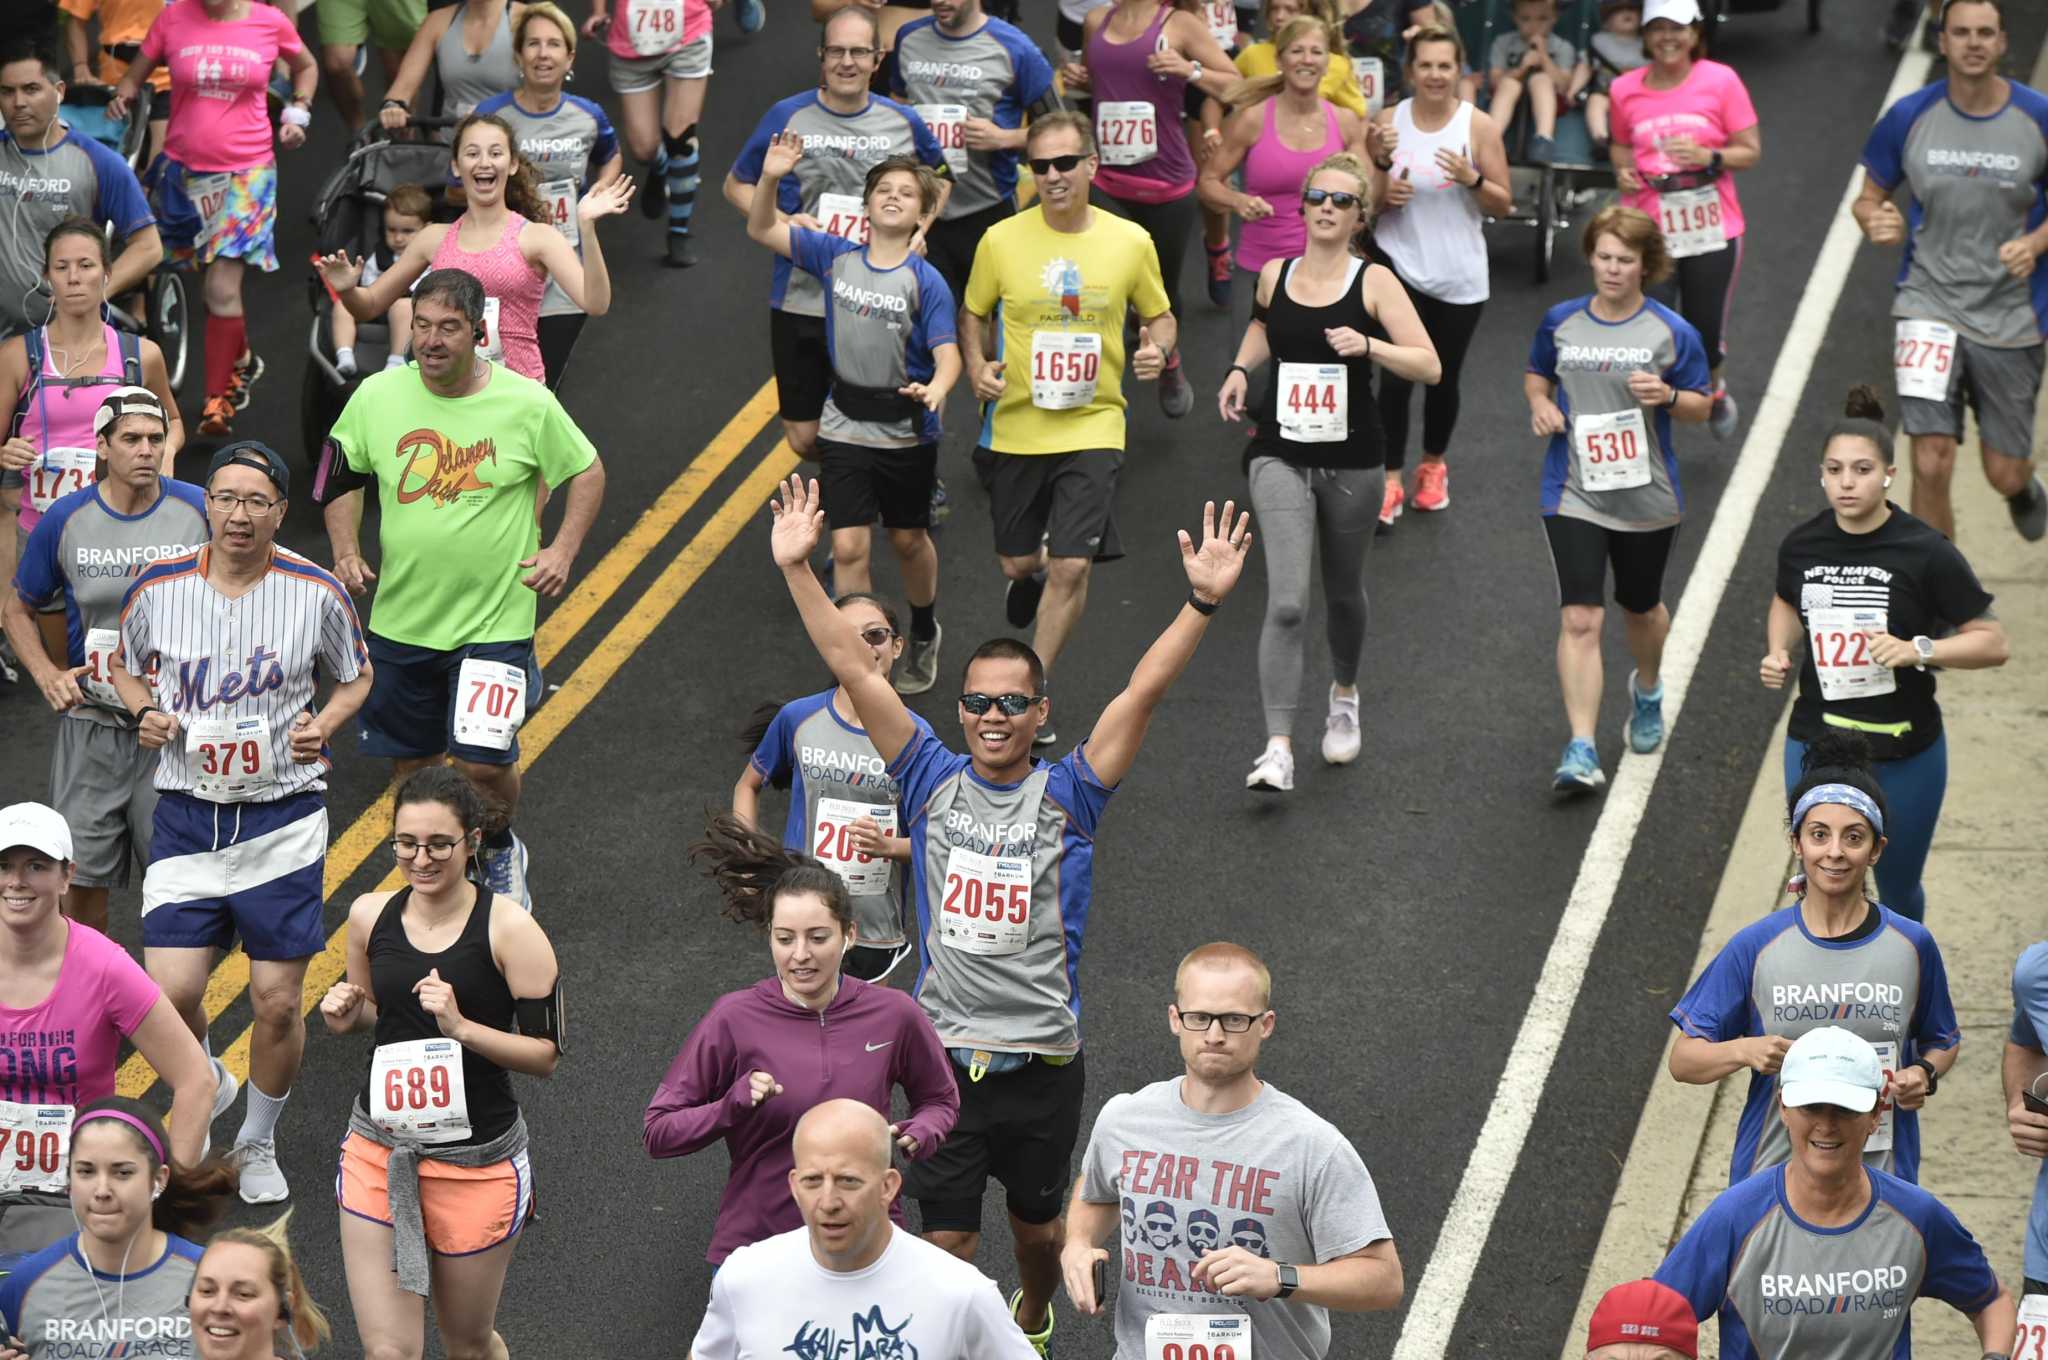 He’s run the Branford Road Race more than 30 times and will do it again